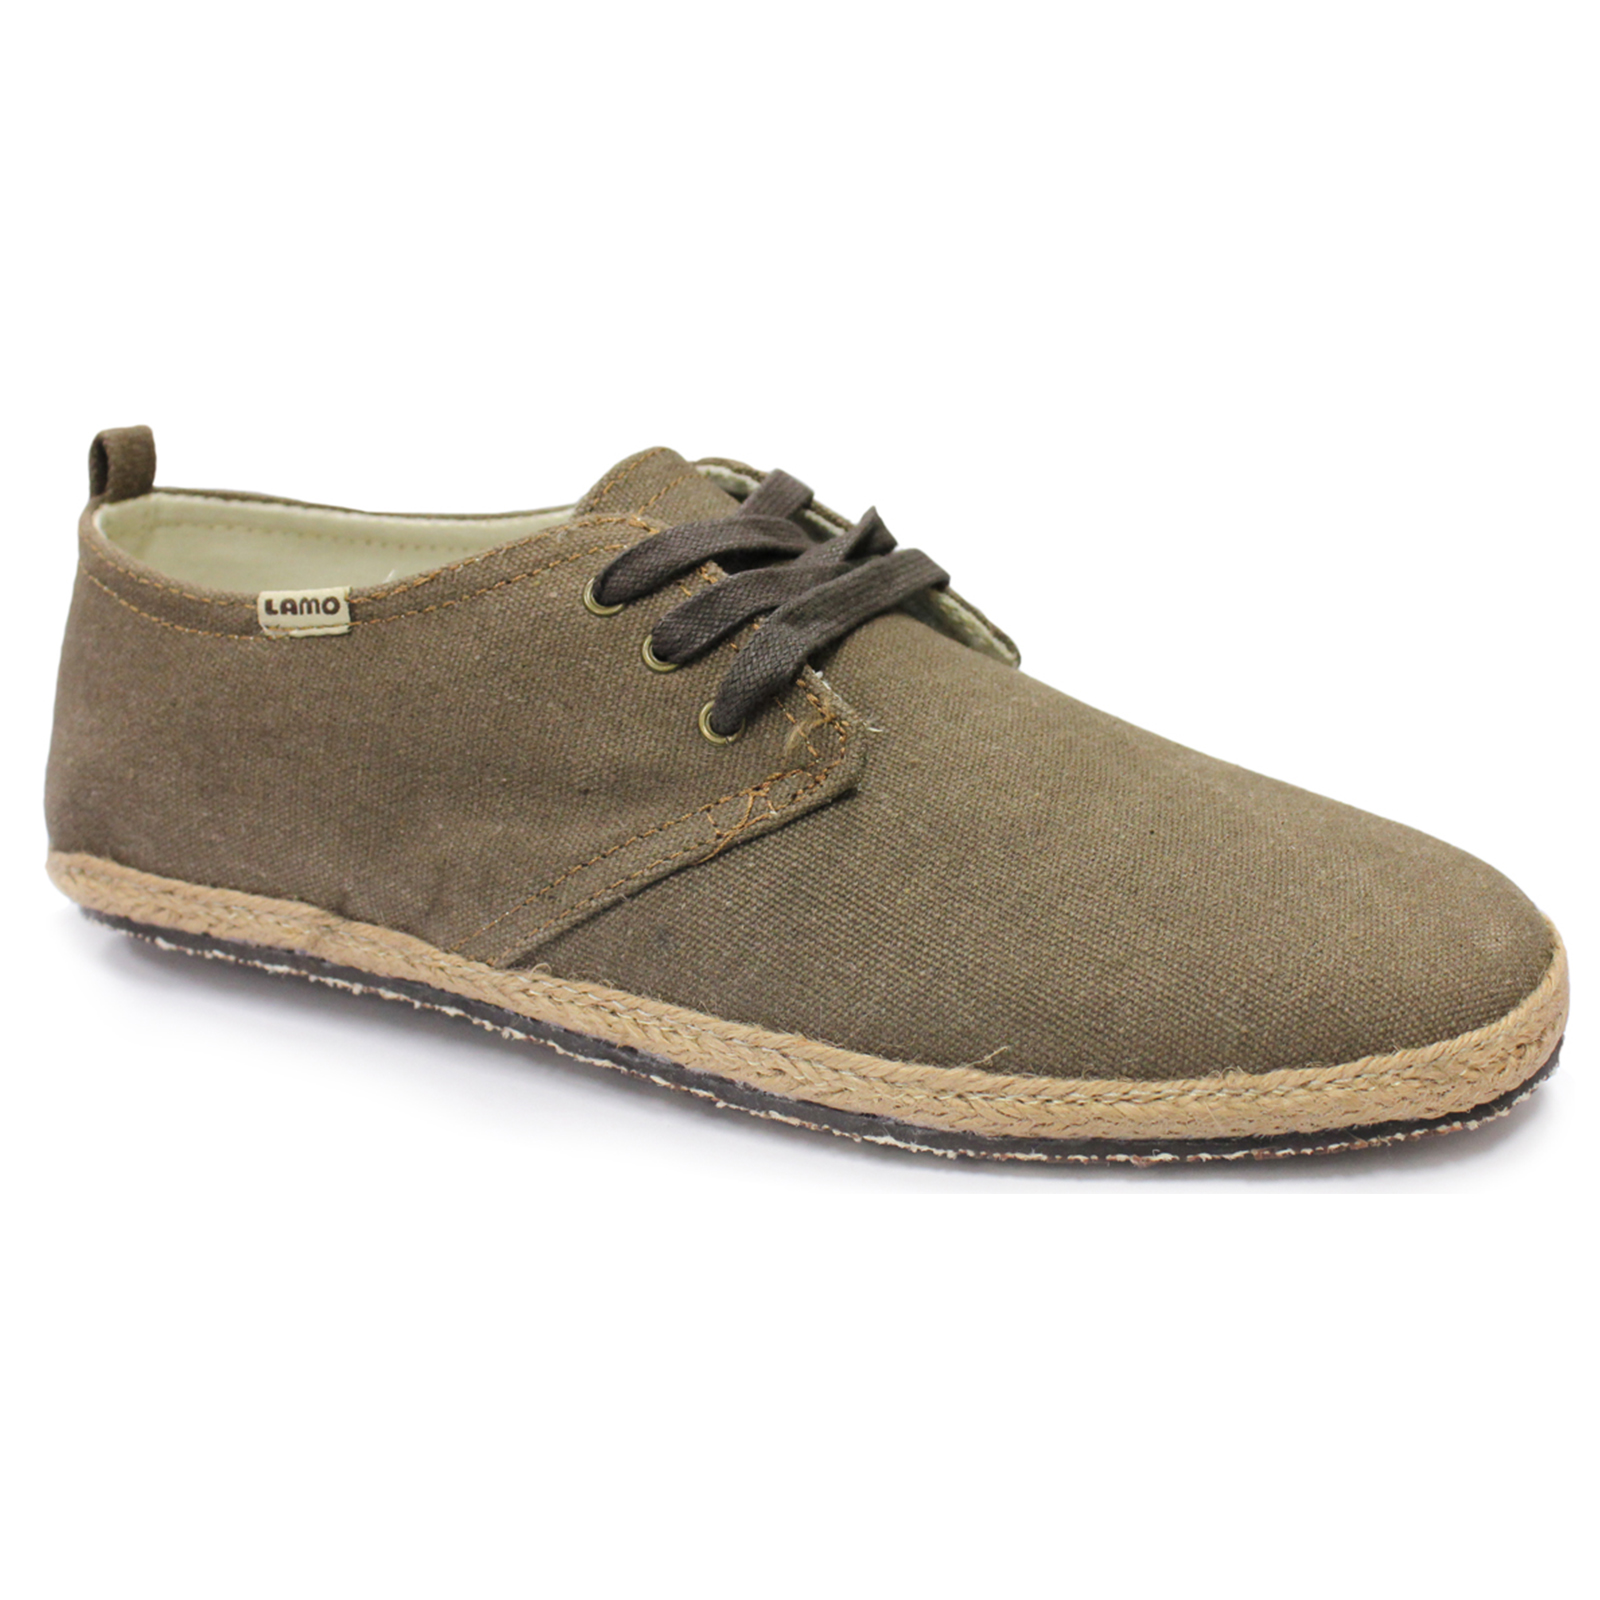 Men's 100% canvas Brown Shoe  Synthetic Lining